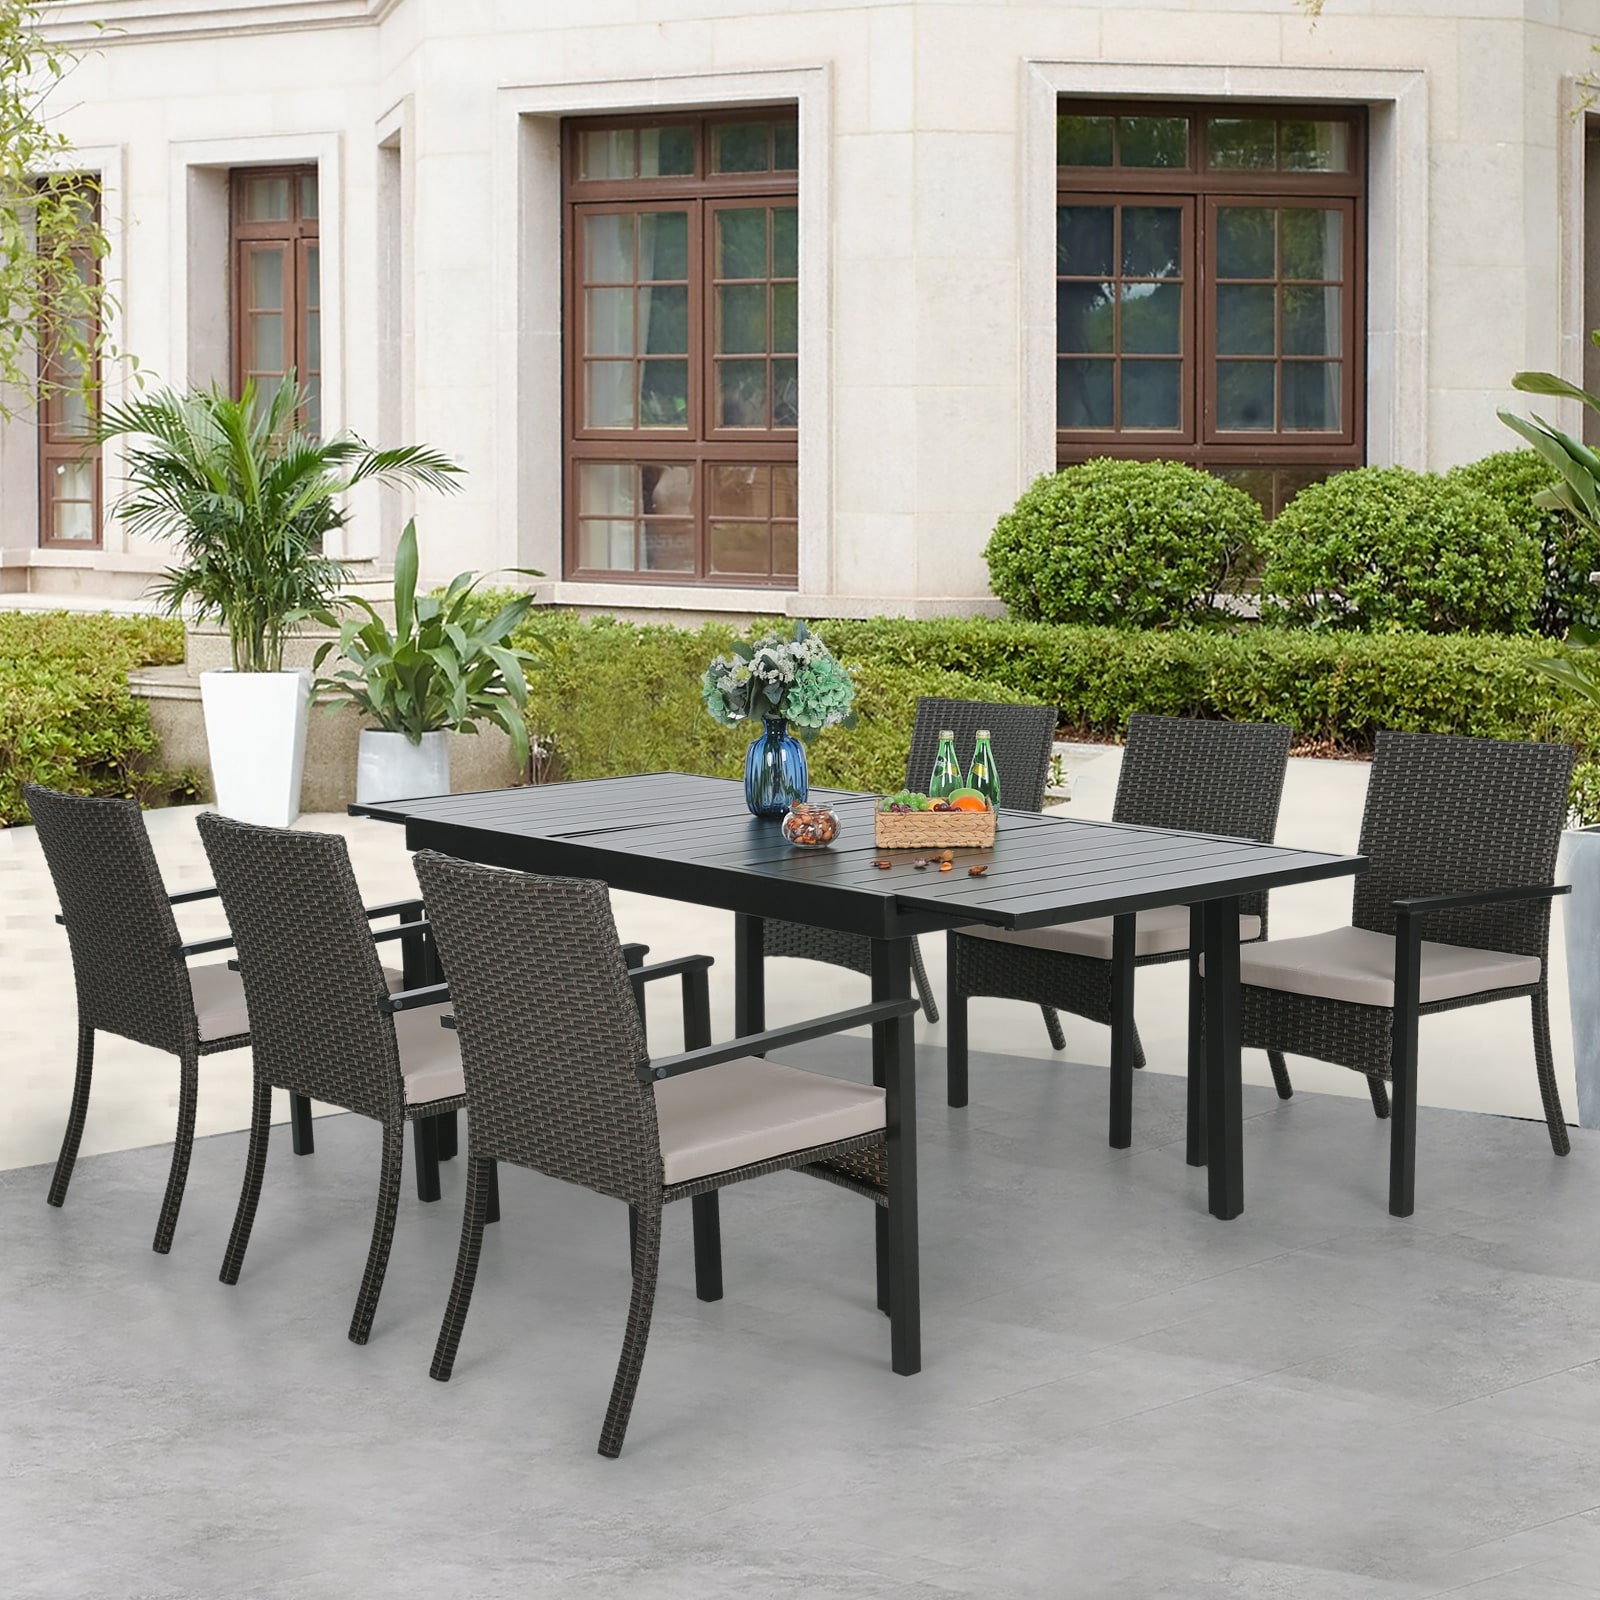 7/9 Patio Dining Set  Expendable Rectangular Outdoor Dining Table With Rattan Chairs